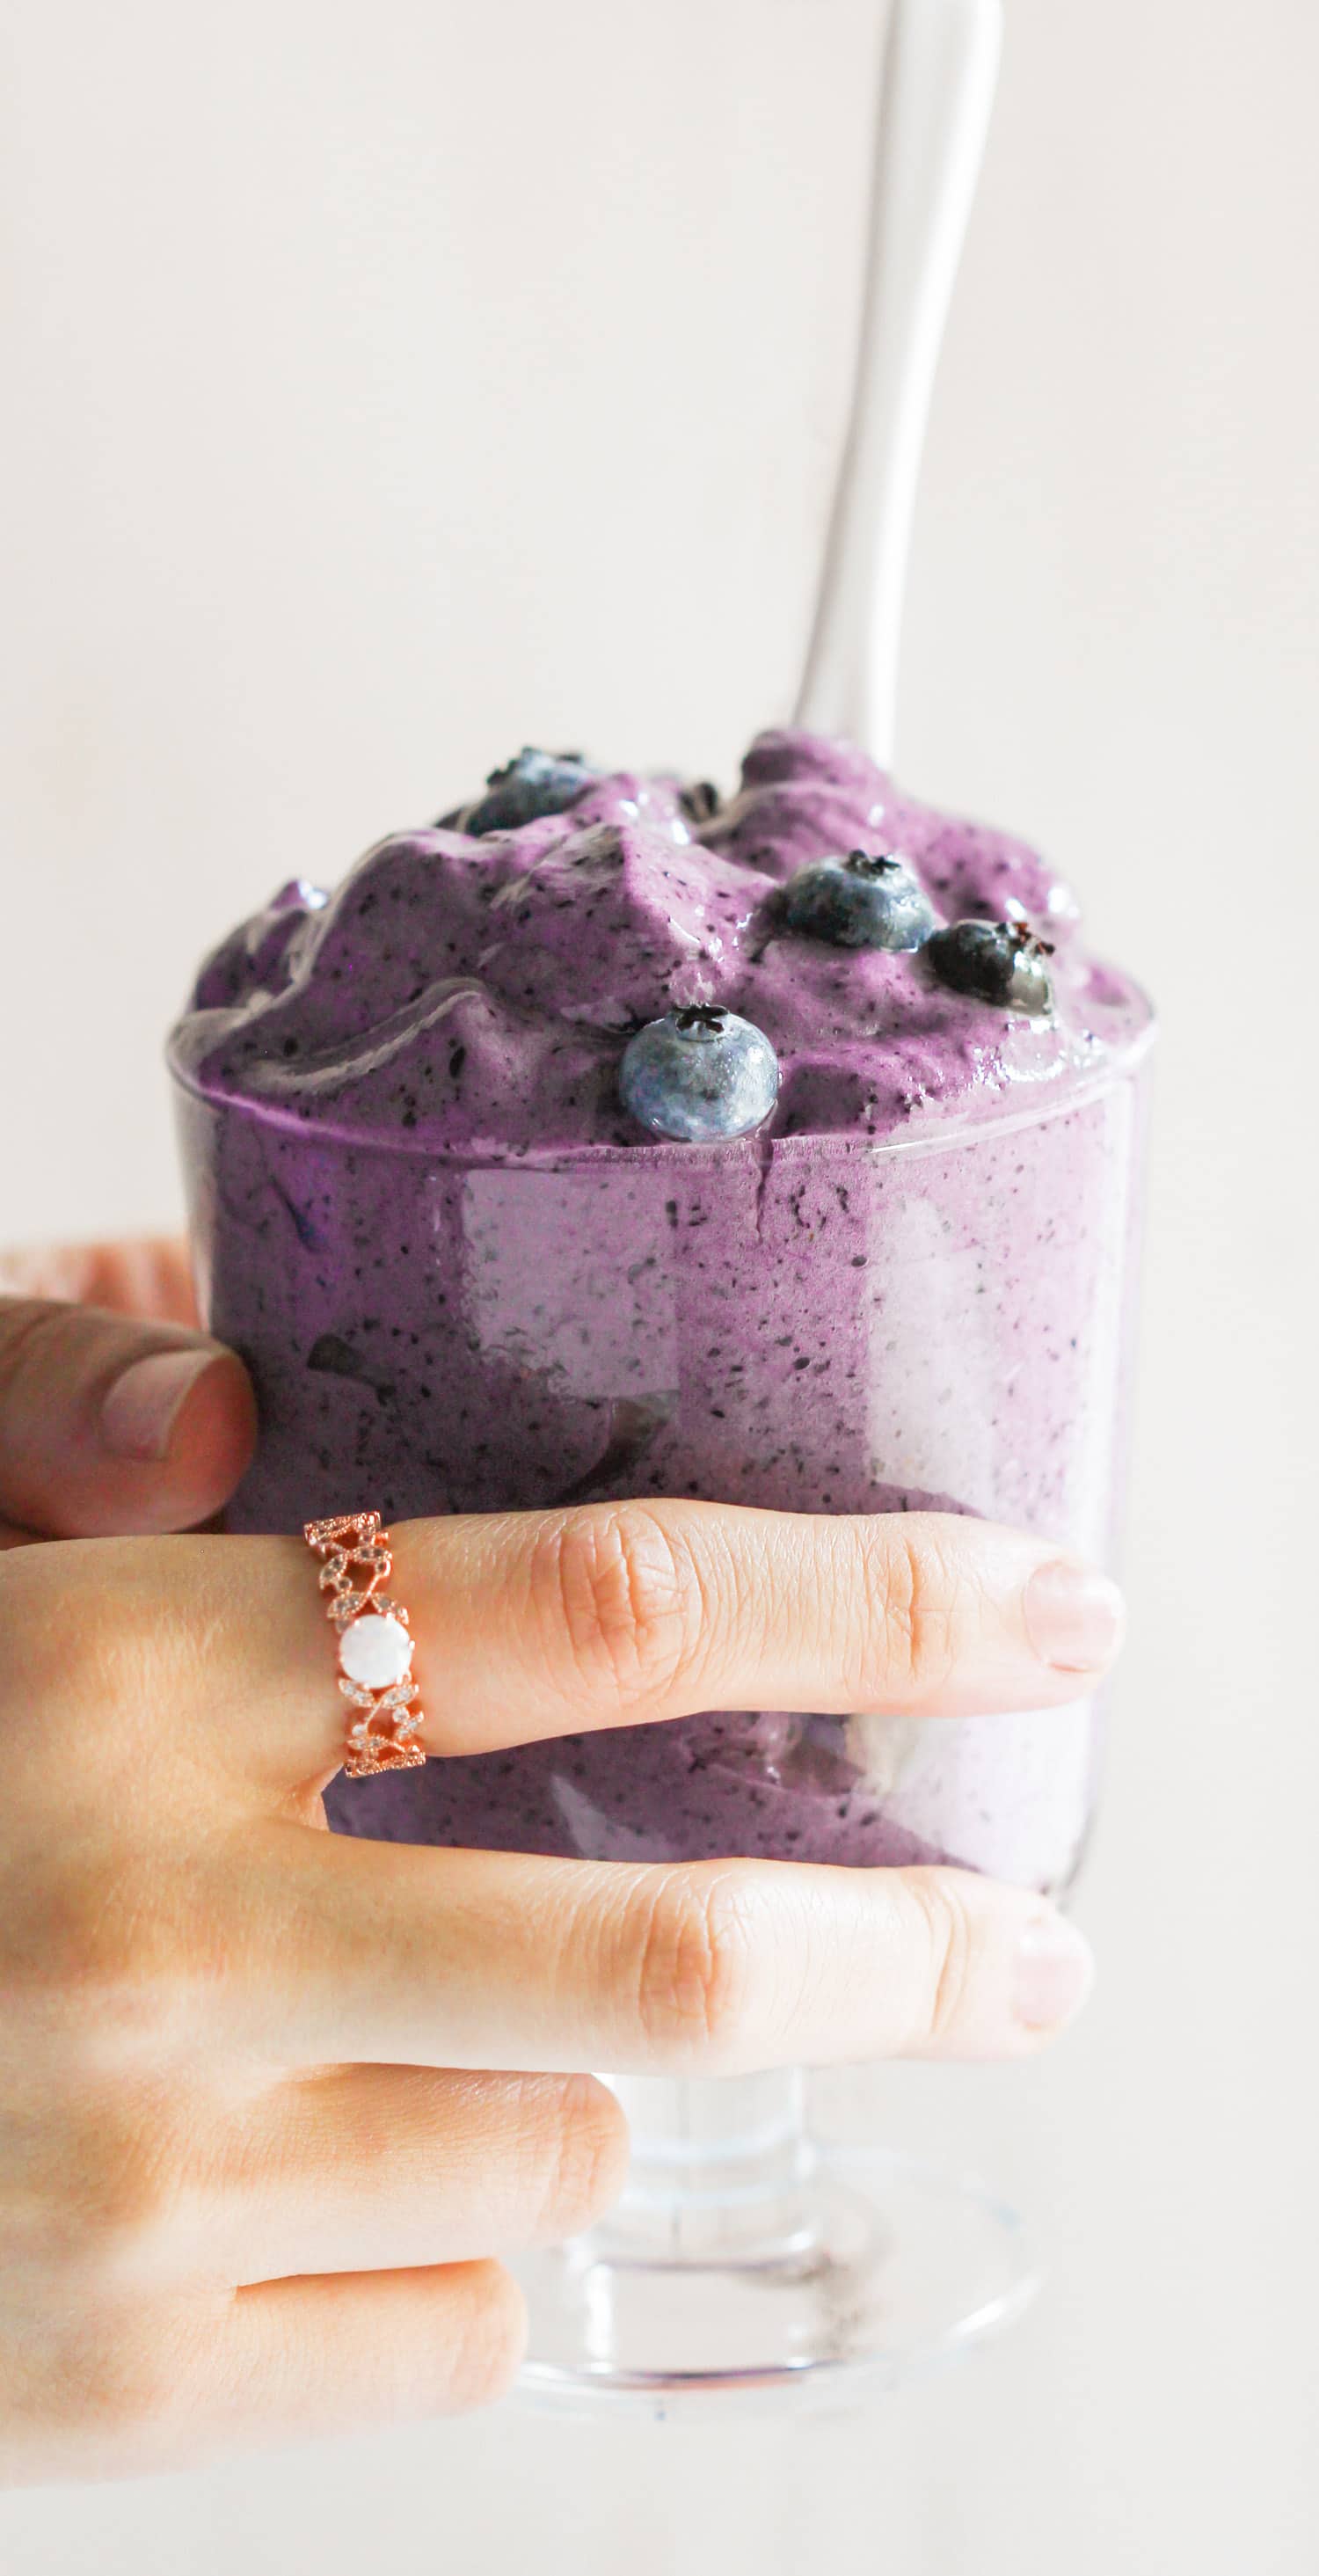 This Healthy Blueberry Protein Fluff is like a mixture between ice cream, whipped cream, and a cloud. So fluffy and voluminous with only 80 calories per serving. Plus, it's refined sugar free, low fat, high protein, and eggless! Healthy Dessert Recipes with sugar free, low calorie, low fat, low carb, high protein, gluten free, dairy free, vegan, and raw options at the Desserts With Benefits Blog (www.DessertsWithBenefits.com)